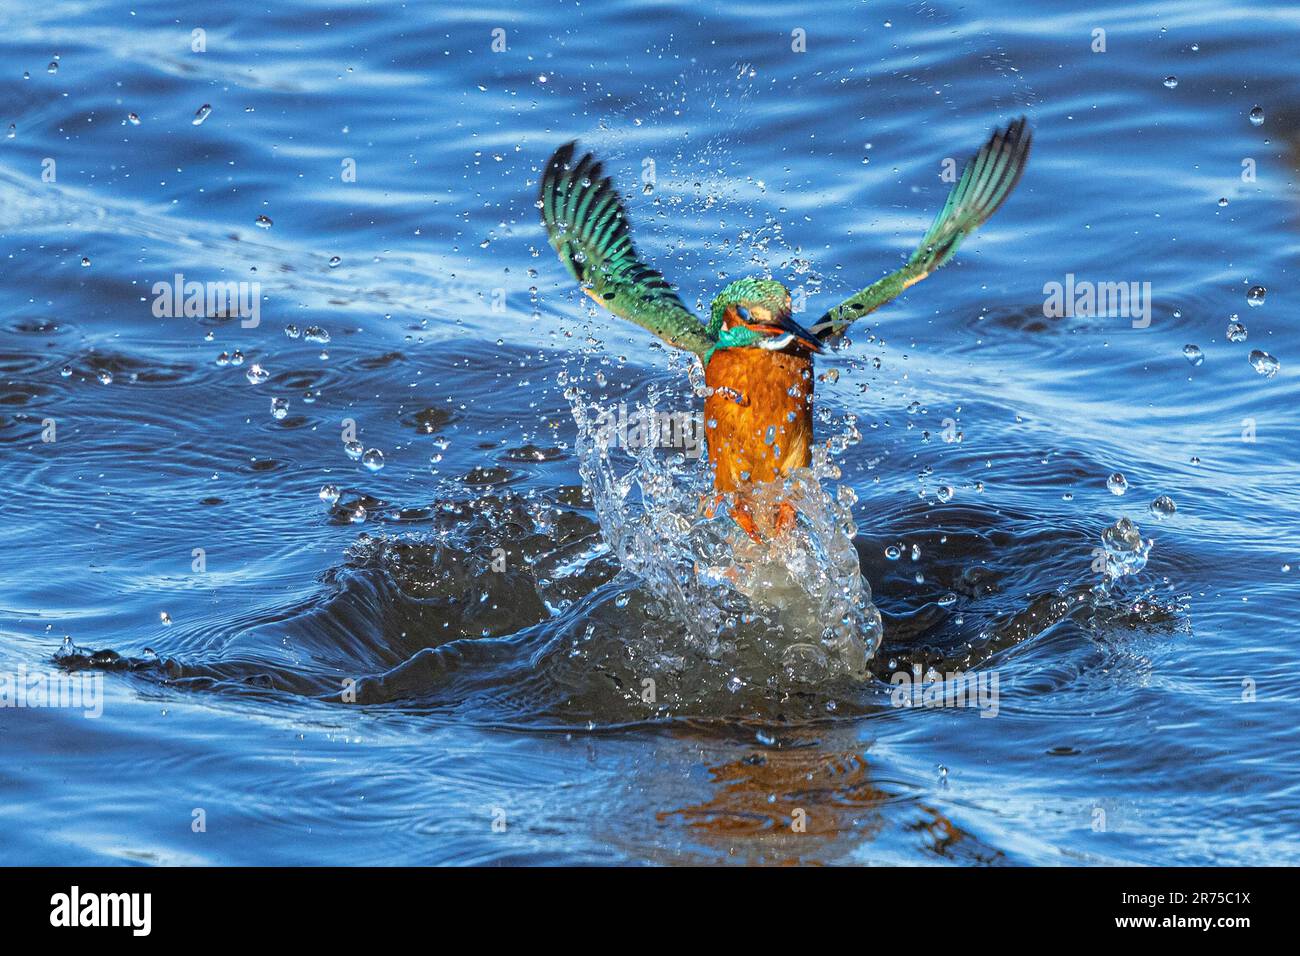 river kingfisher (Alcedo atthis), shooting out of the water surrounded by drops of water with prey fish, front view, Germany, Bavaria Stock Photo